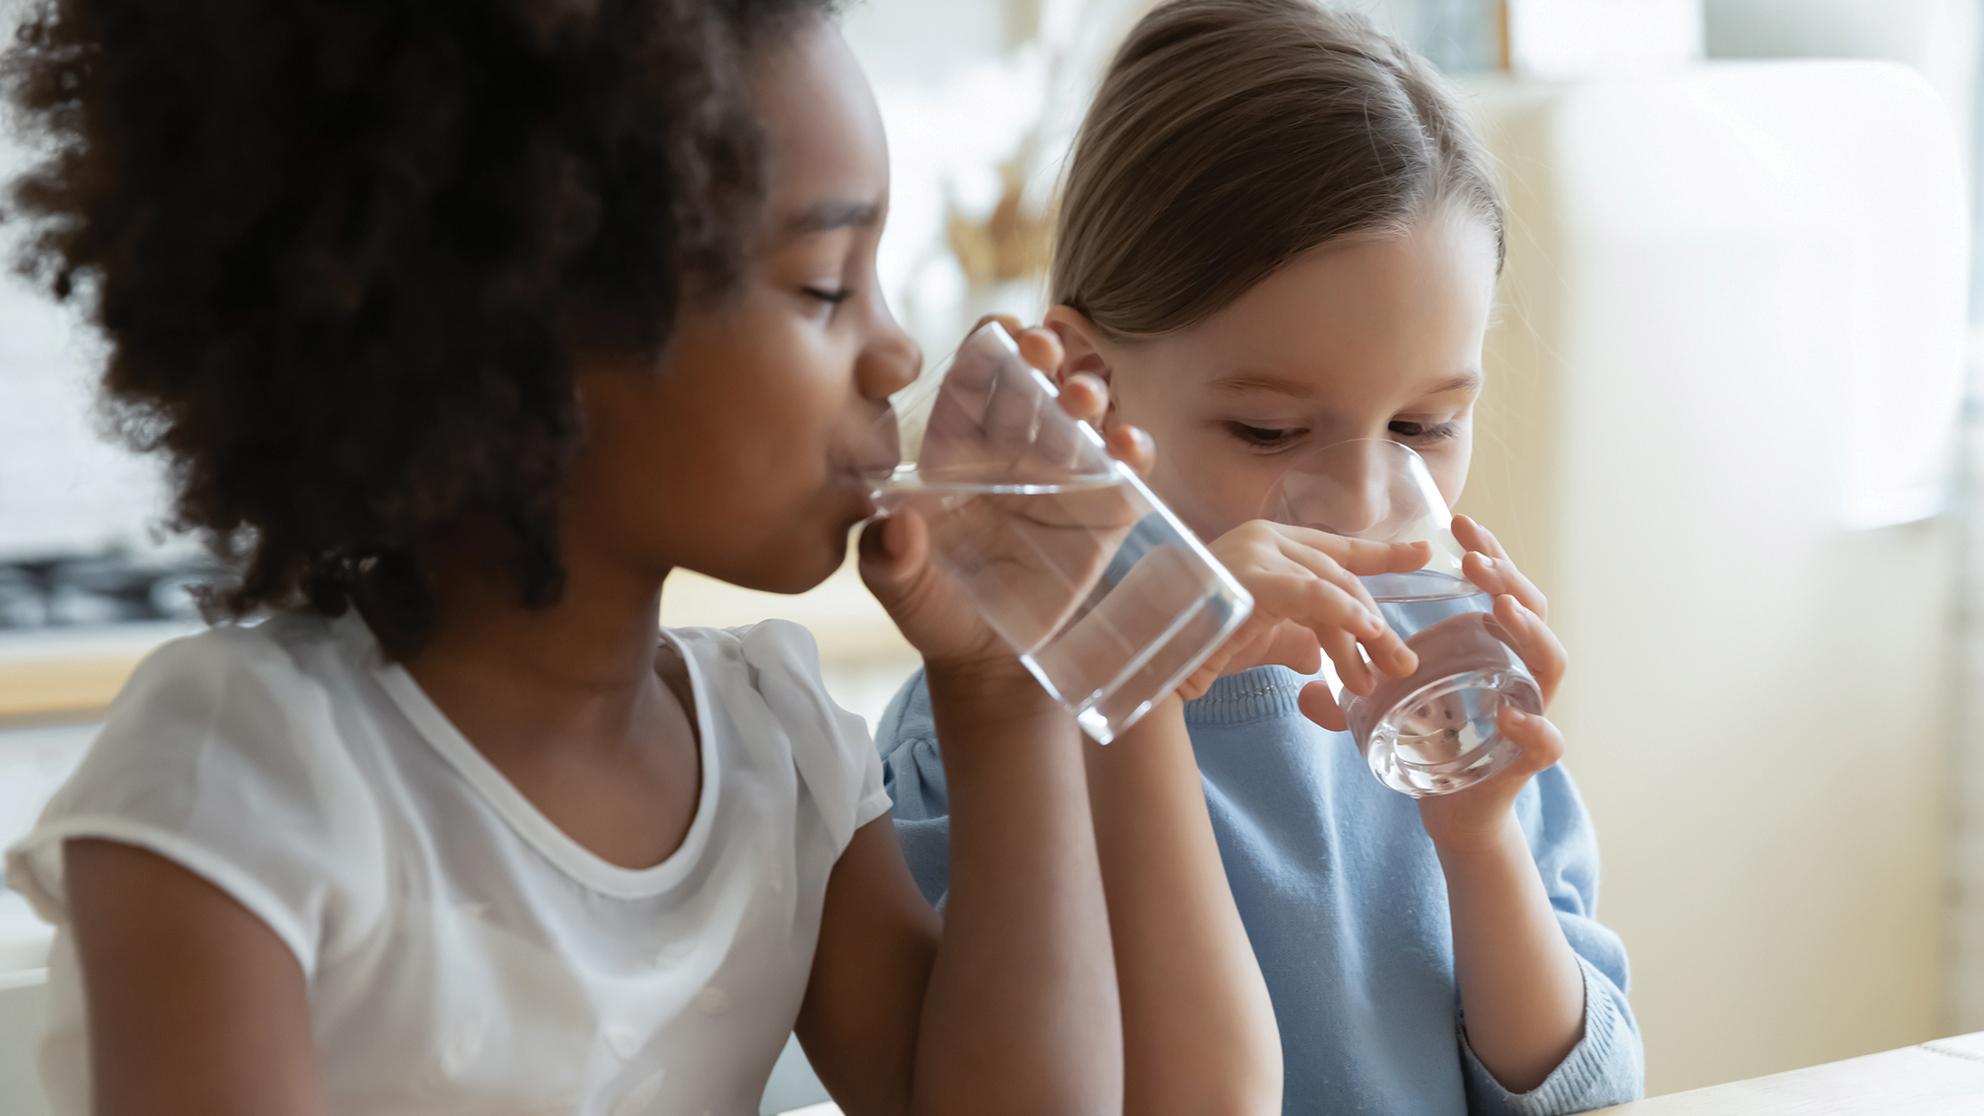 Children drinking water from glasses